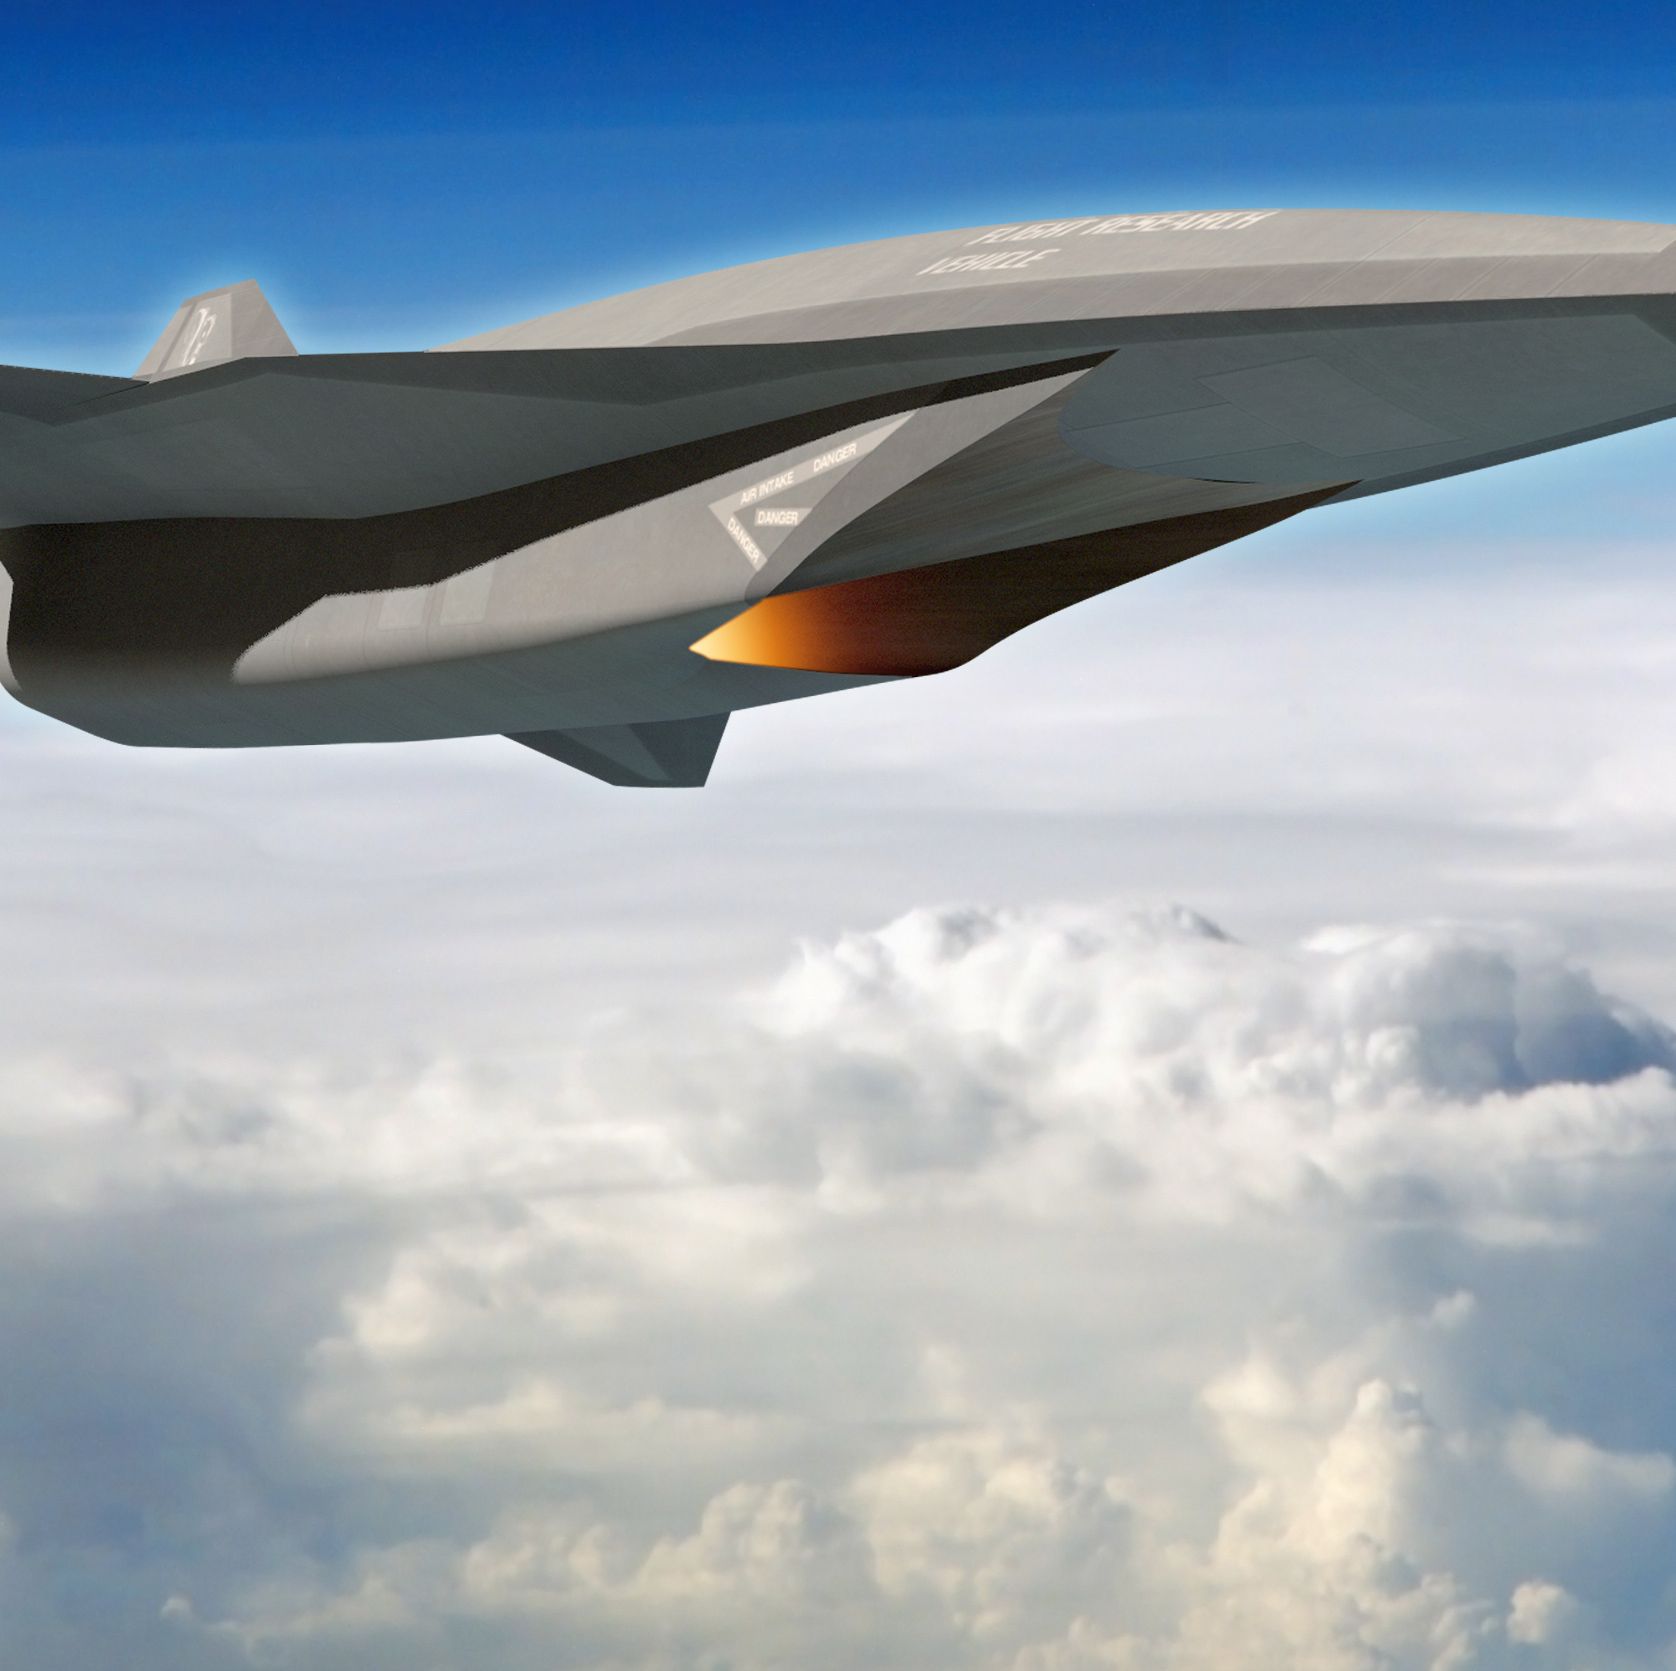 Did Skunk Works Deliver Its New, Top Secret Spy Plane to the Air Force?